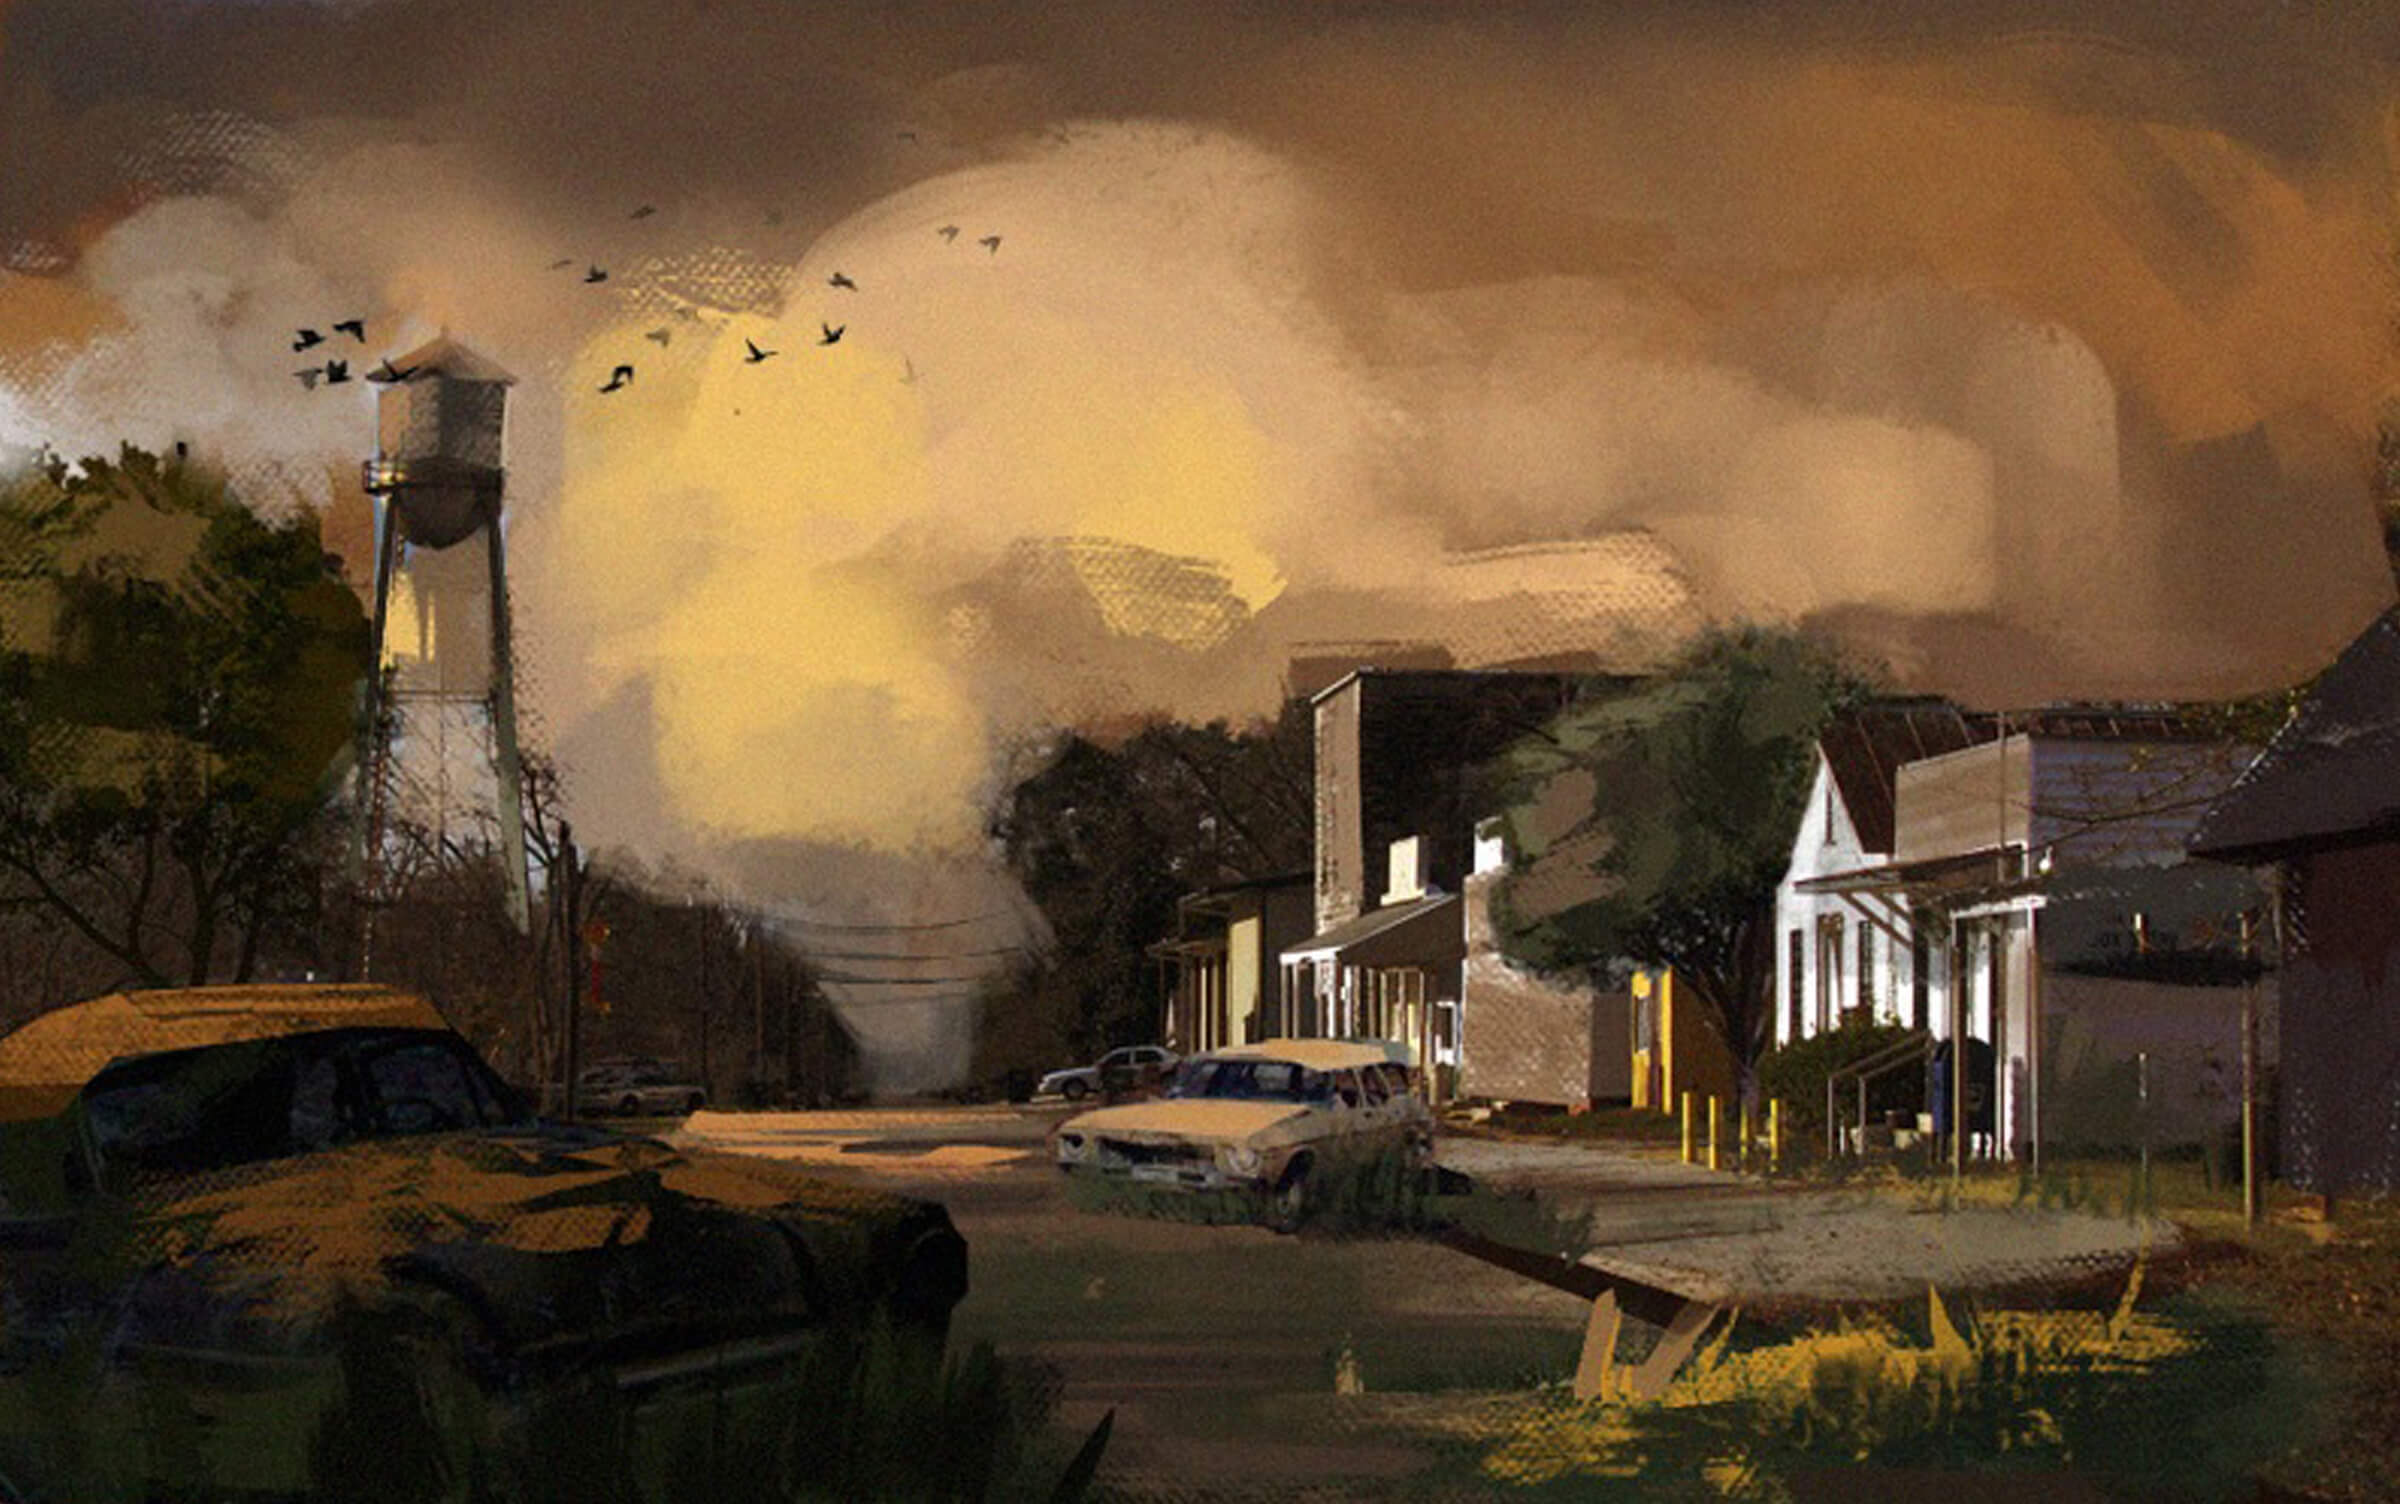 digital painting of an abandoned town with cars, stores and a water tower